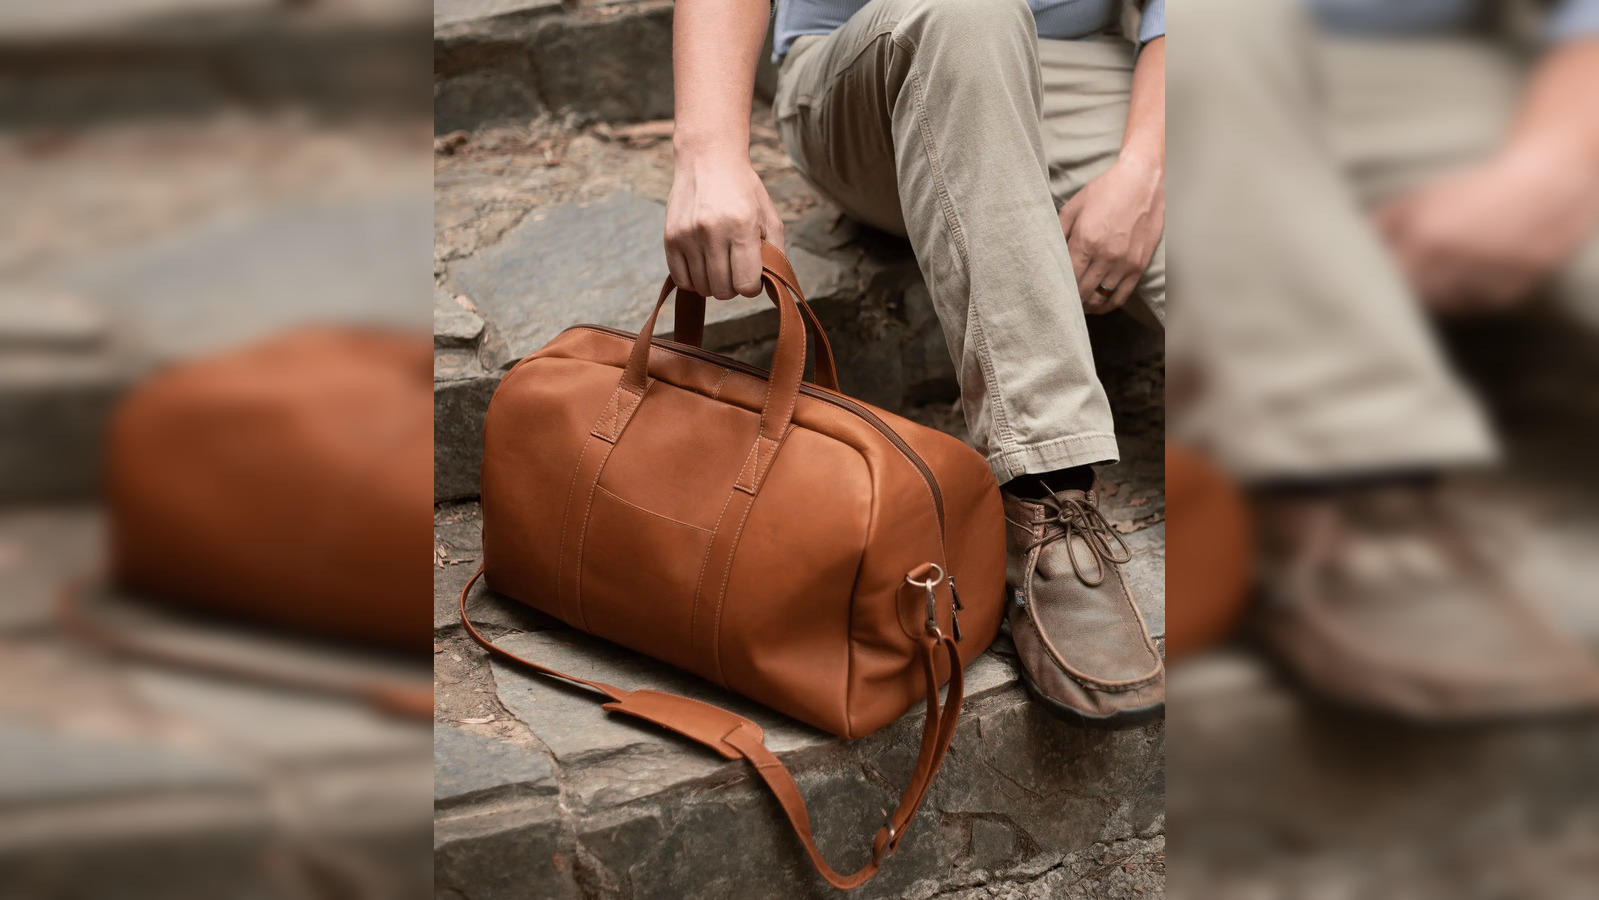 The 9 Best Duffle Bags of 2023